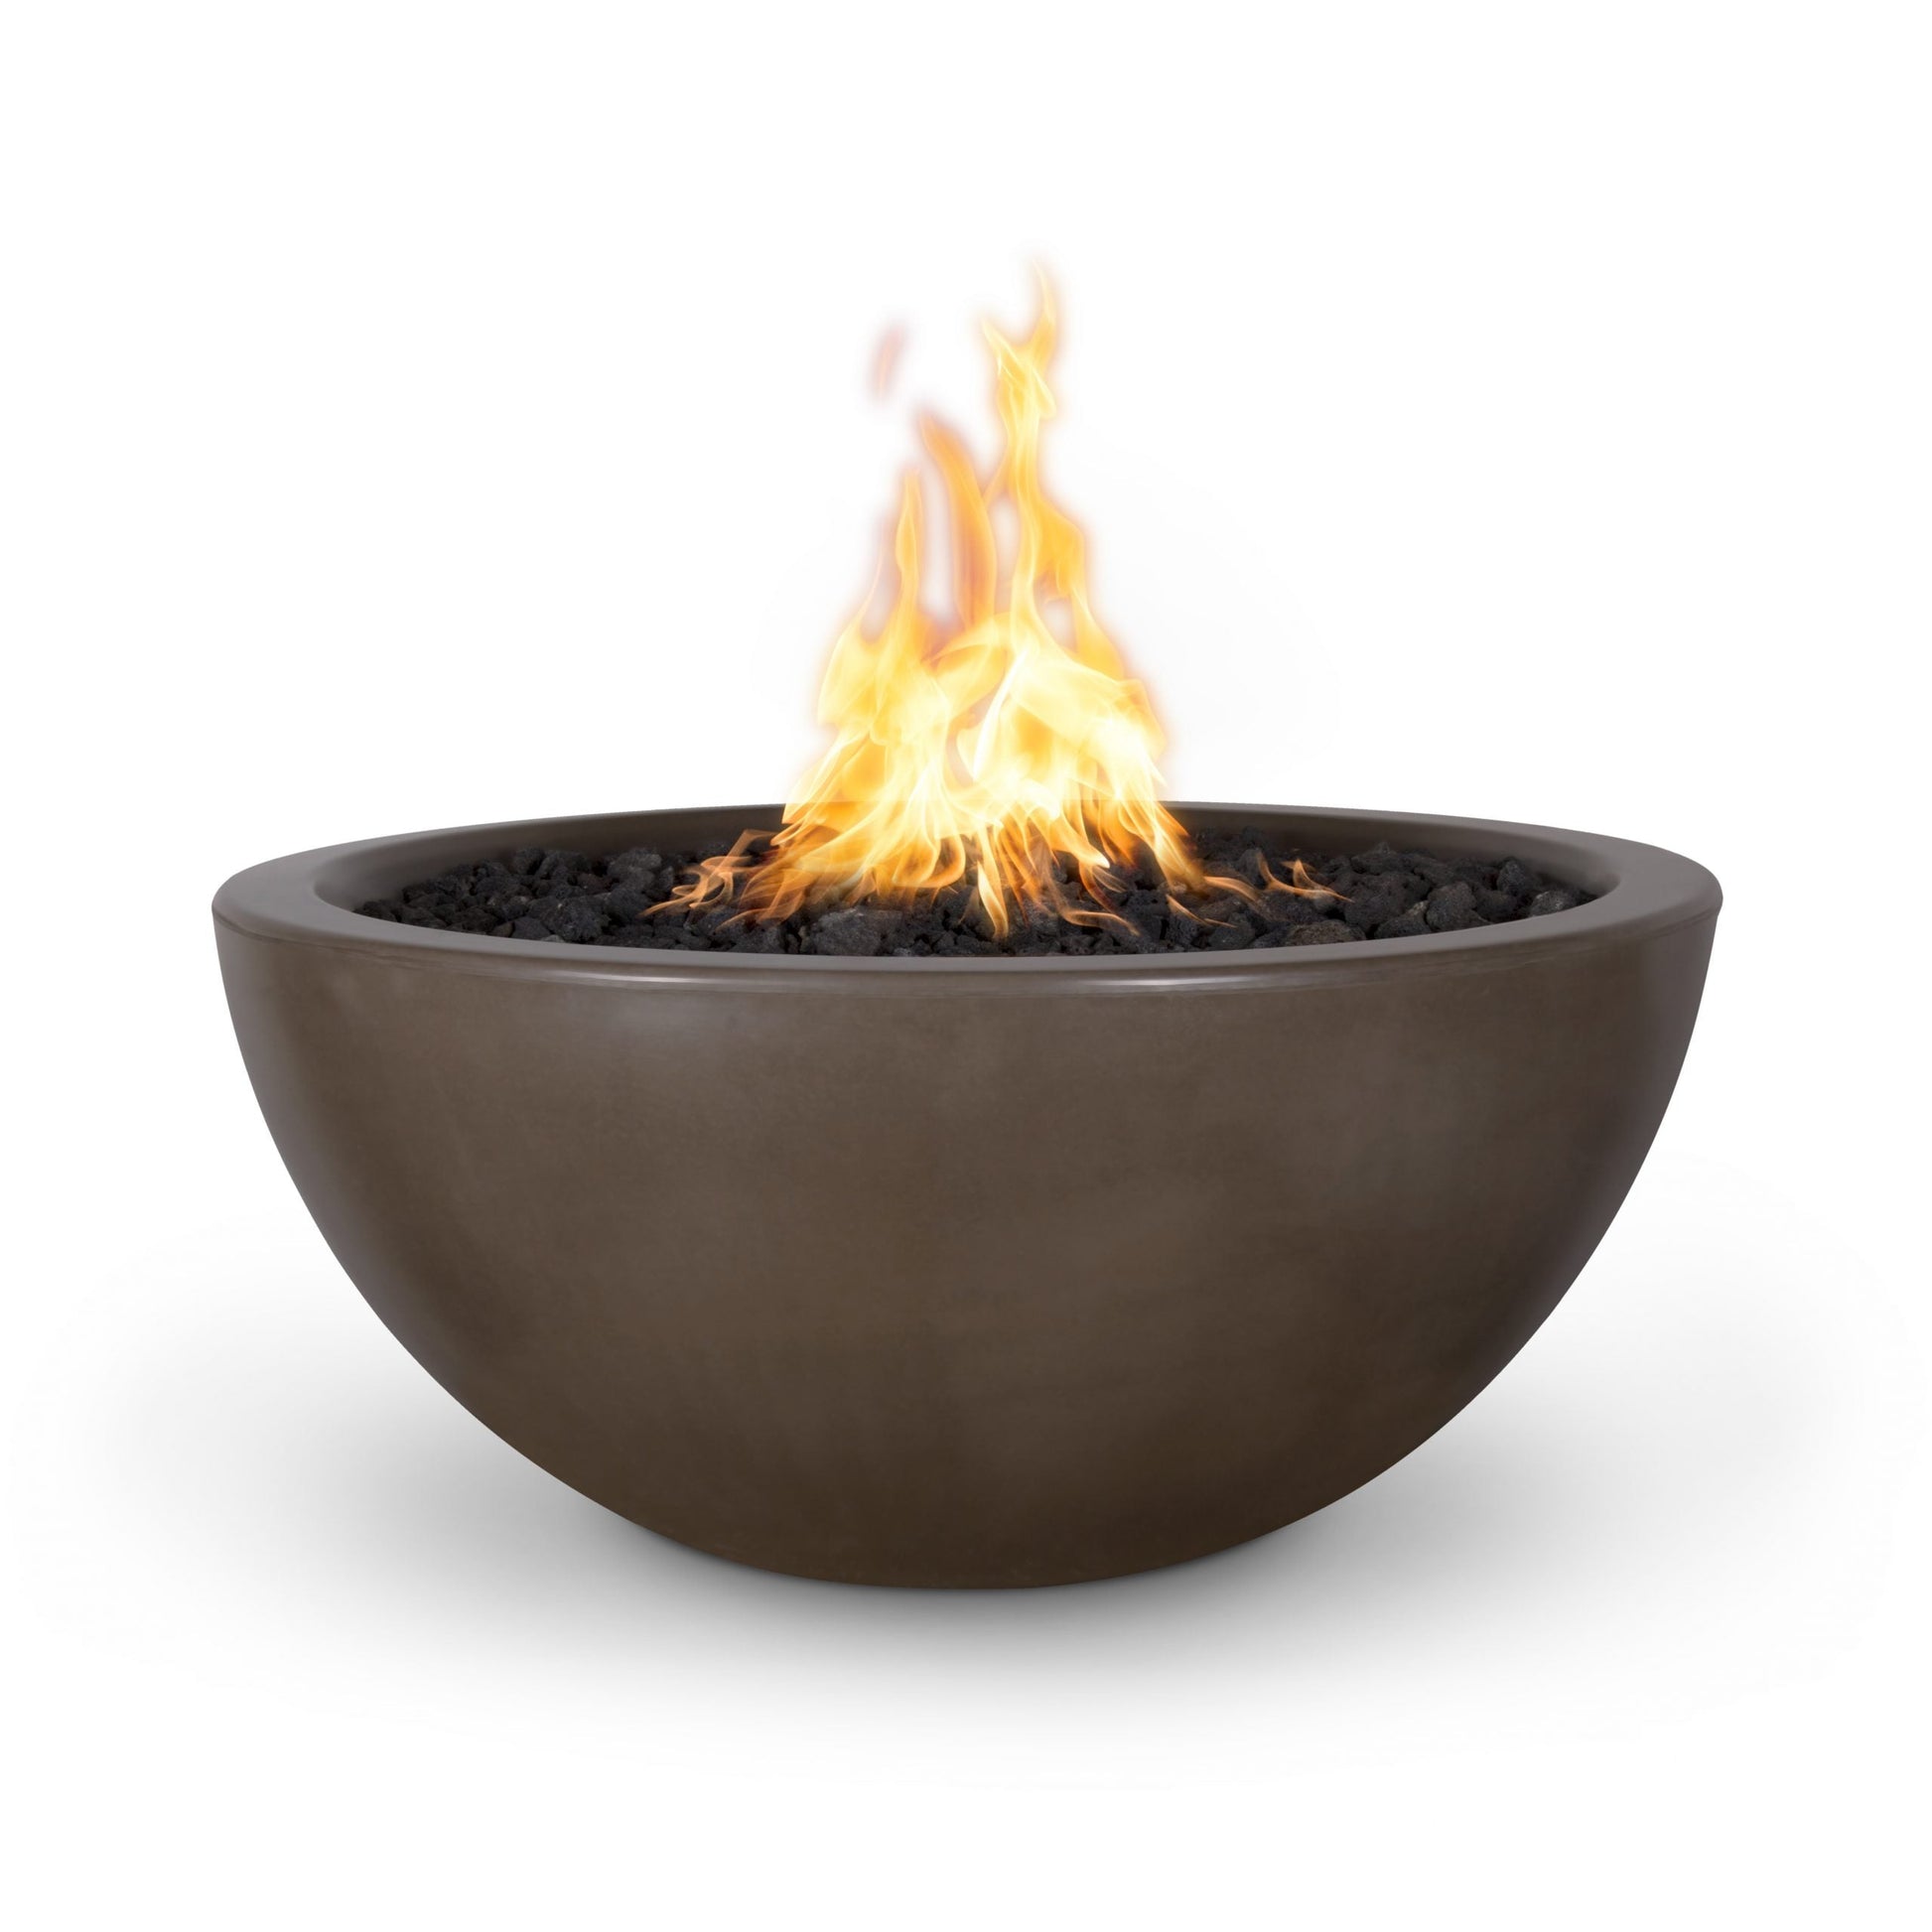 The Outdoor Plus Round Luna 30" Metallic Silver GFRC Concrete Liquid Propane Fire Bowl with Match Lit with Flame Sense Ignition